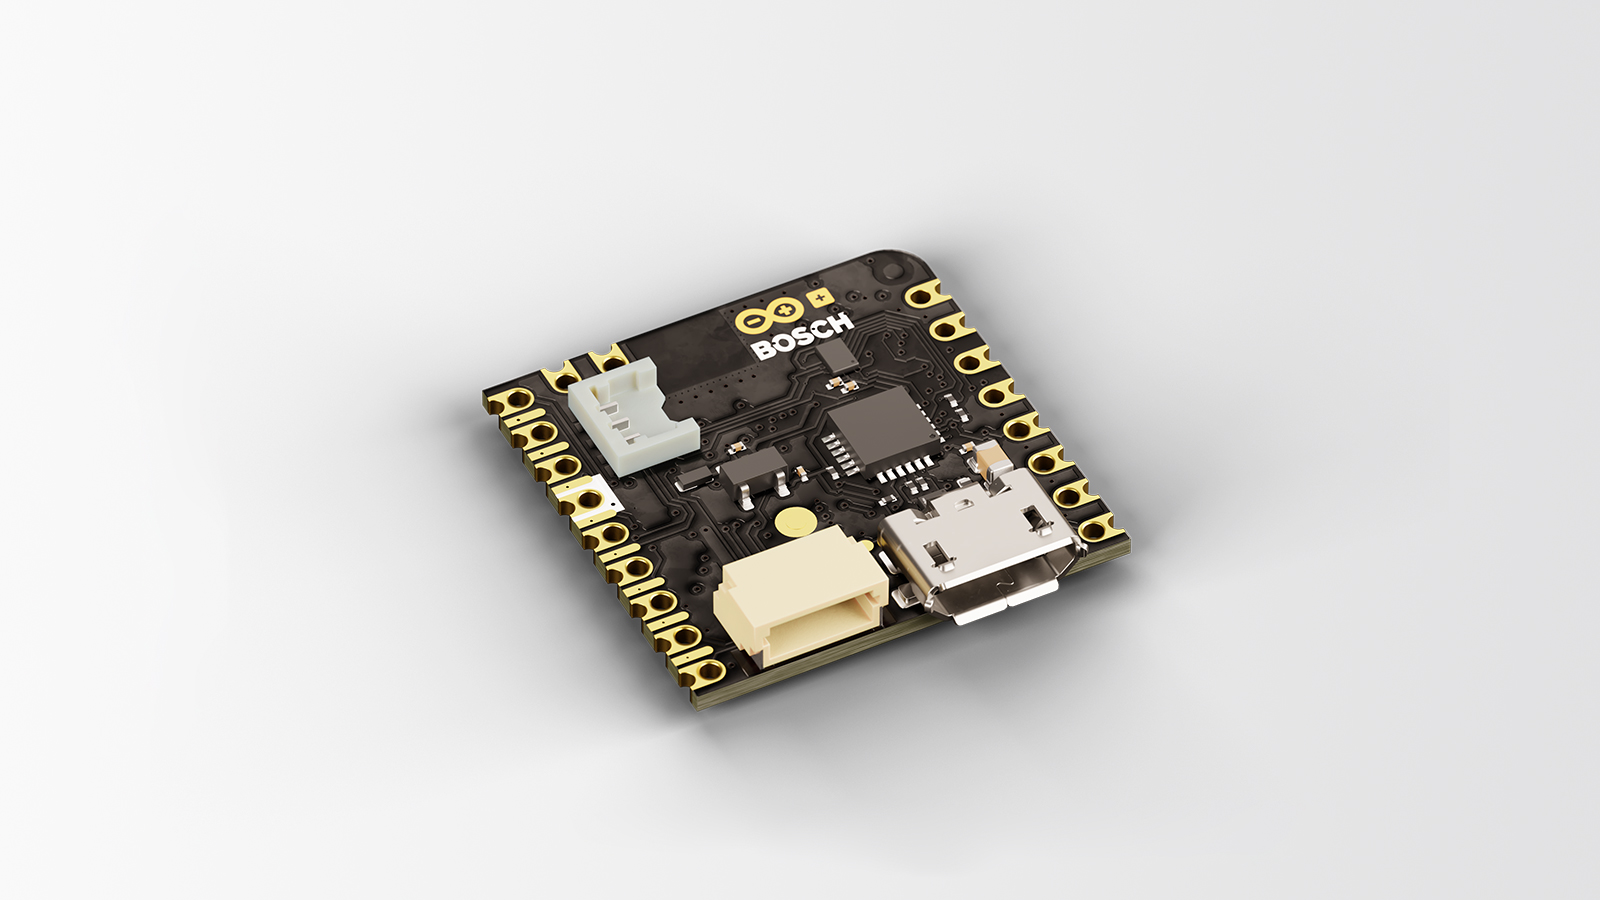 Arduino Releases Nicla Sense ME Board with a New Form Factor and 4x Bosch Sensors